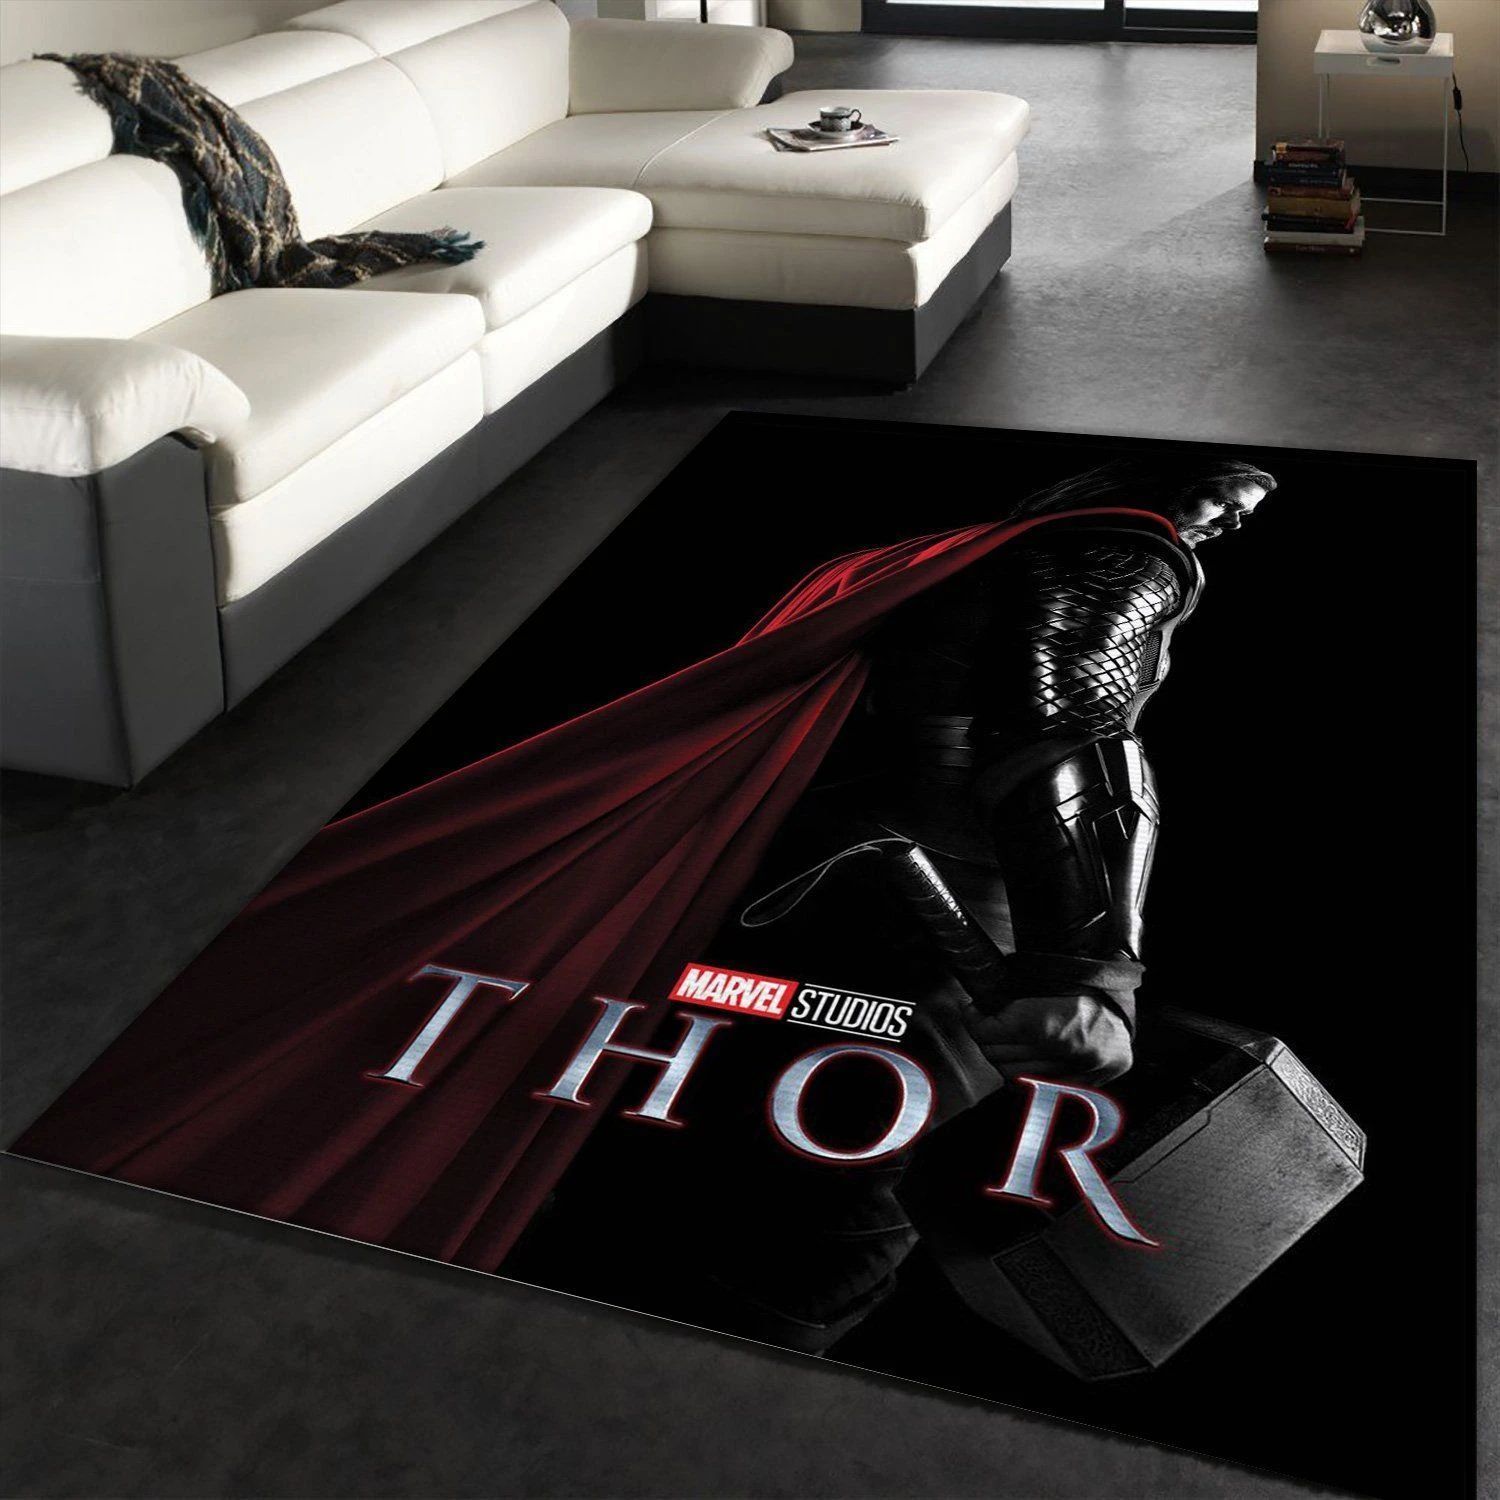 Thor Movie Area Rug Carpet, Living room and bedroom Rug, US Gift Decor - Indoor Outdoor Rugs 1